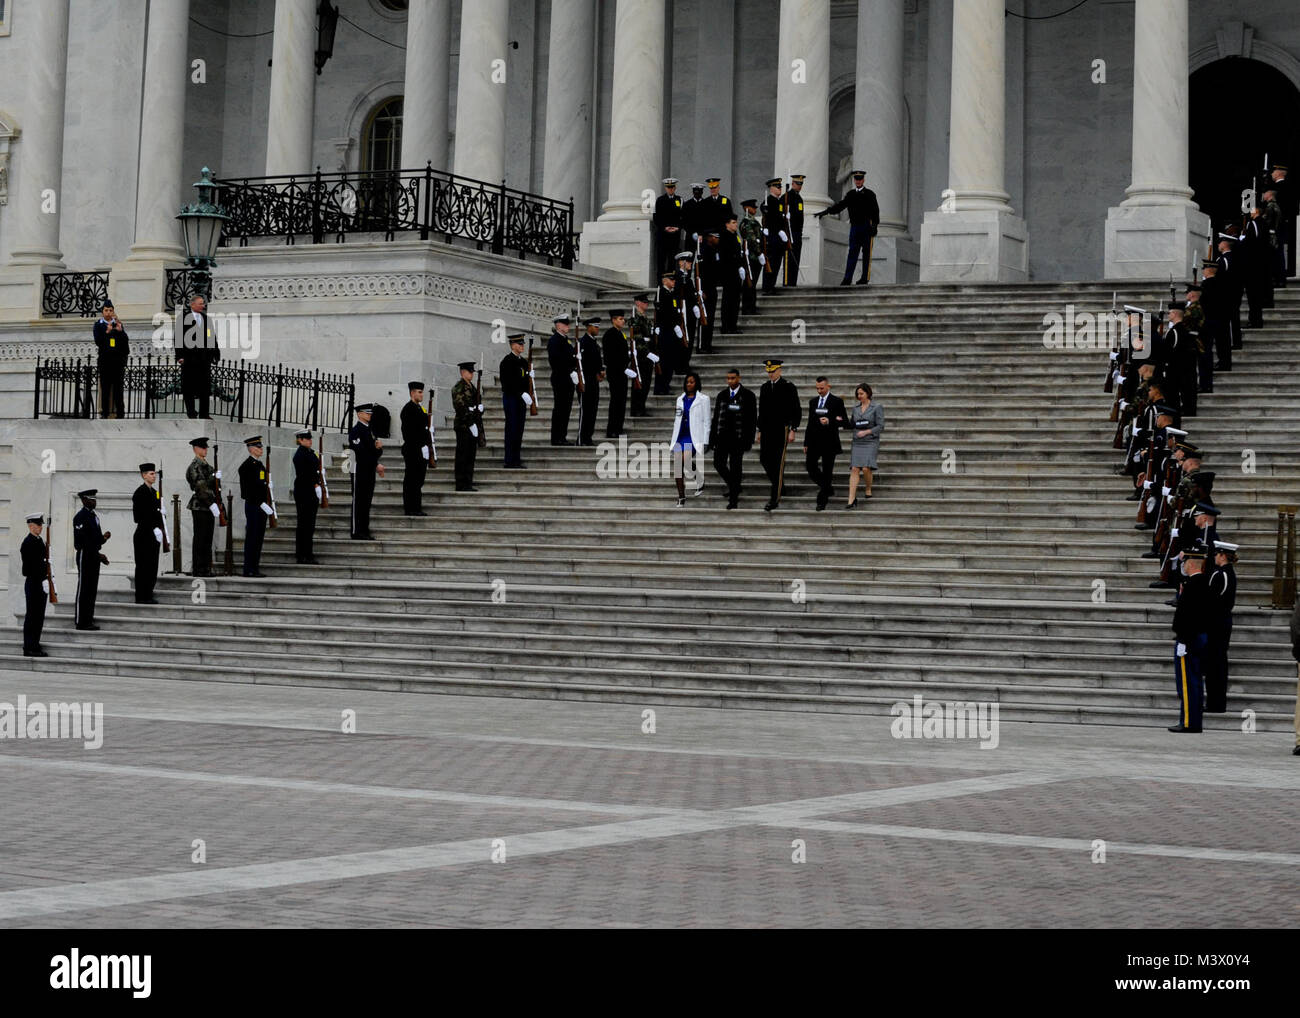 A joint honor guard salutes as role players representing the president, vice president and their spouses descend the U.S. Capitol steps during the presidential inauguration dress rehearsal in Washington, D.C. (Department of Defense photo/Staff Sgt. Wesley Farnsworth) Inauguration004 by AirmanMagazine Stock Photo